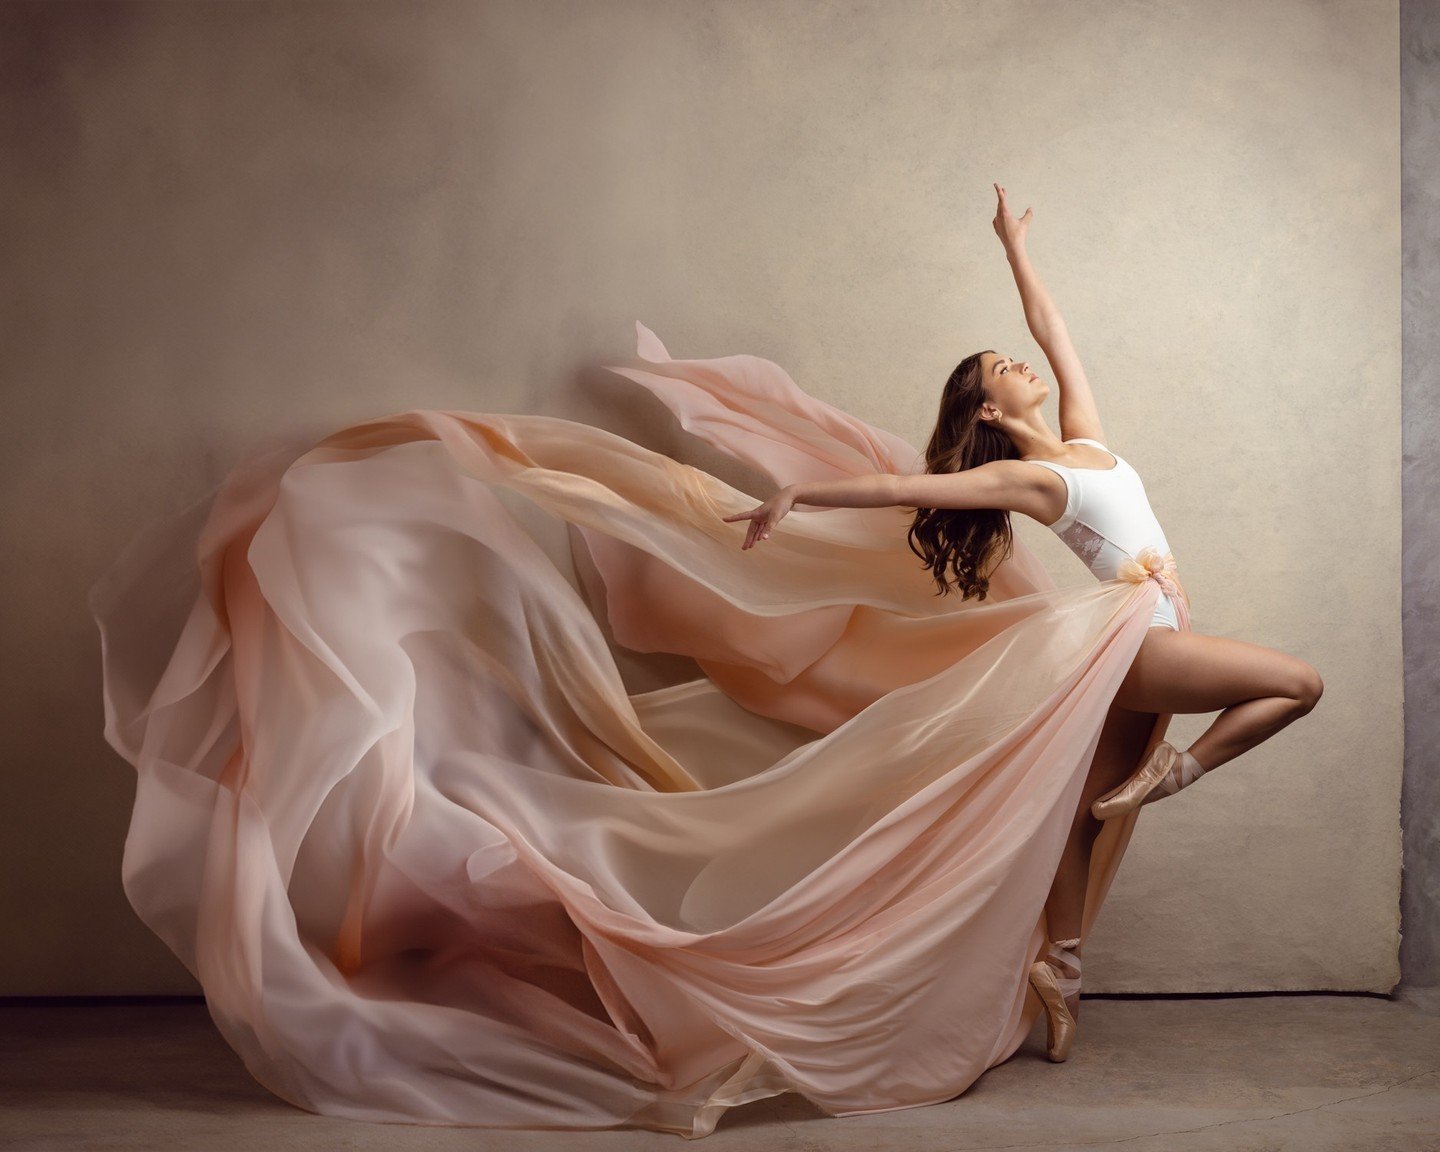 A big part of every dance shoot is playing with fabric. We have silks in every color of the rainbow in the studio and have been having the best time creating these images with swirling fabric. Which color is your favorite?